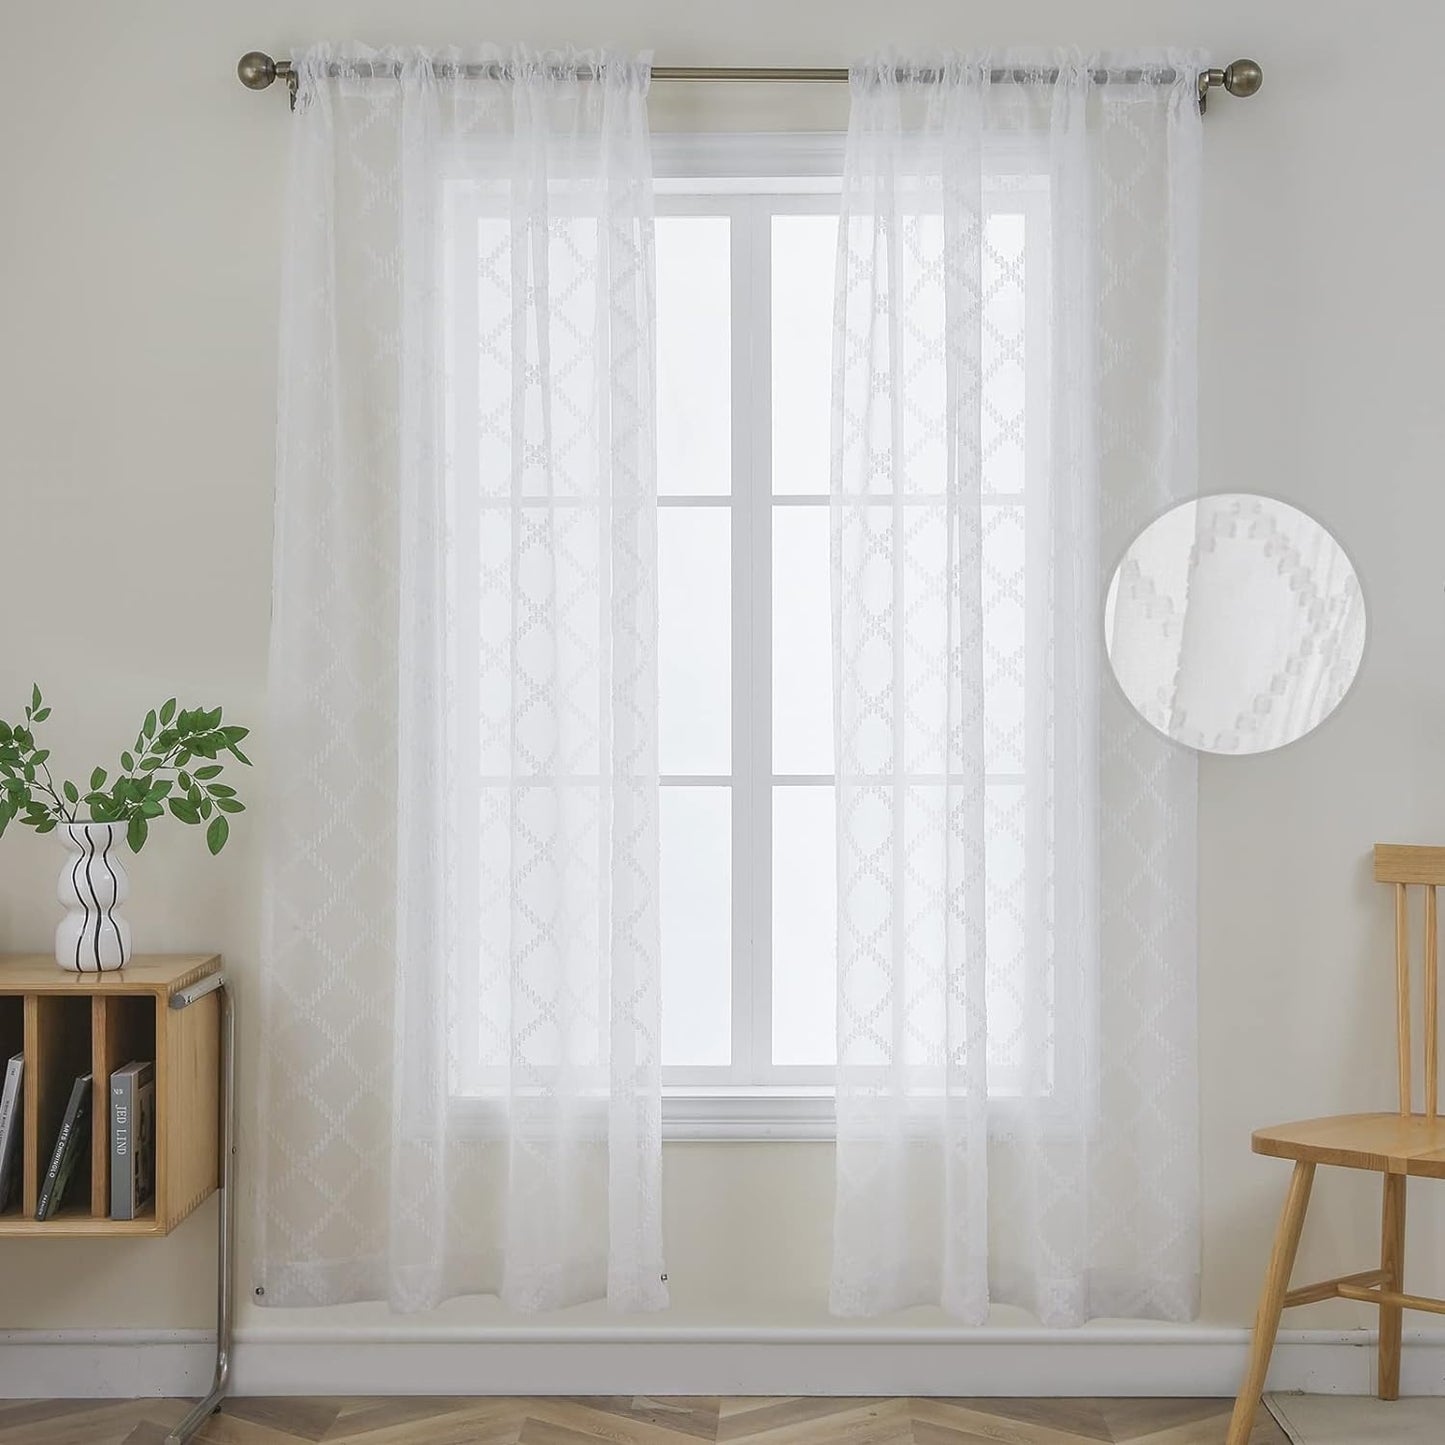 Joydeco White Sheer Curtains 63 Inch Length 2 Panels Set, Rod Pocket Long Sheer Curtains for Window Bedroom Living Room, Lightweight Semi Drape Panels for Yard Patio (54X63 Inch, off White)  Joydeco Trellis Embroidery-White 54W X 72L Inch X 2 Panels 